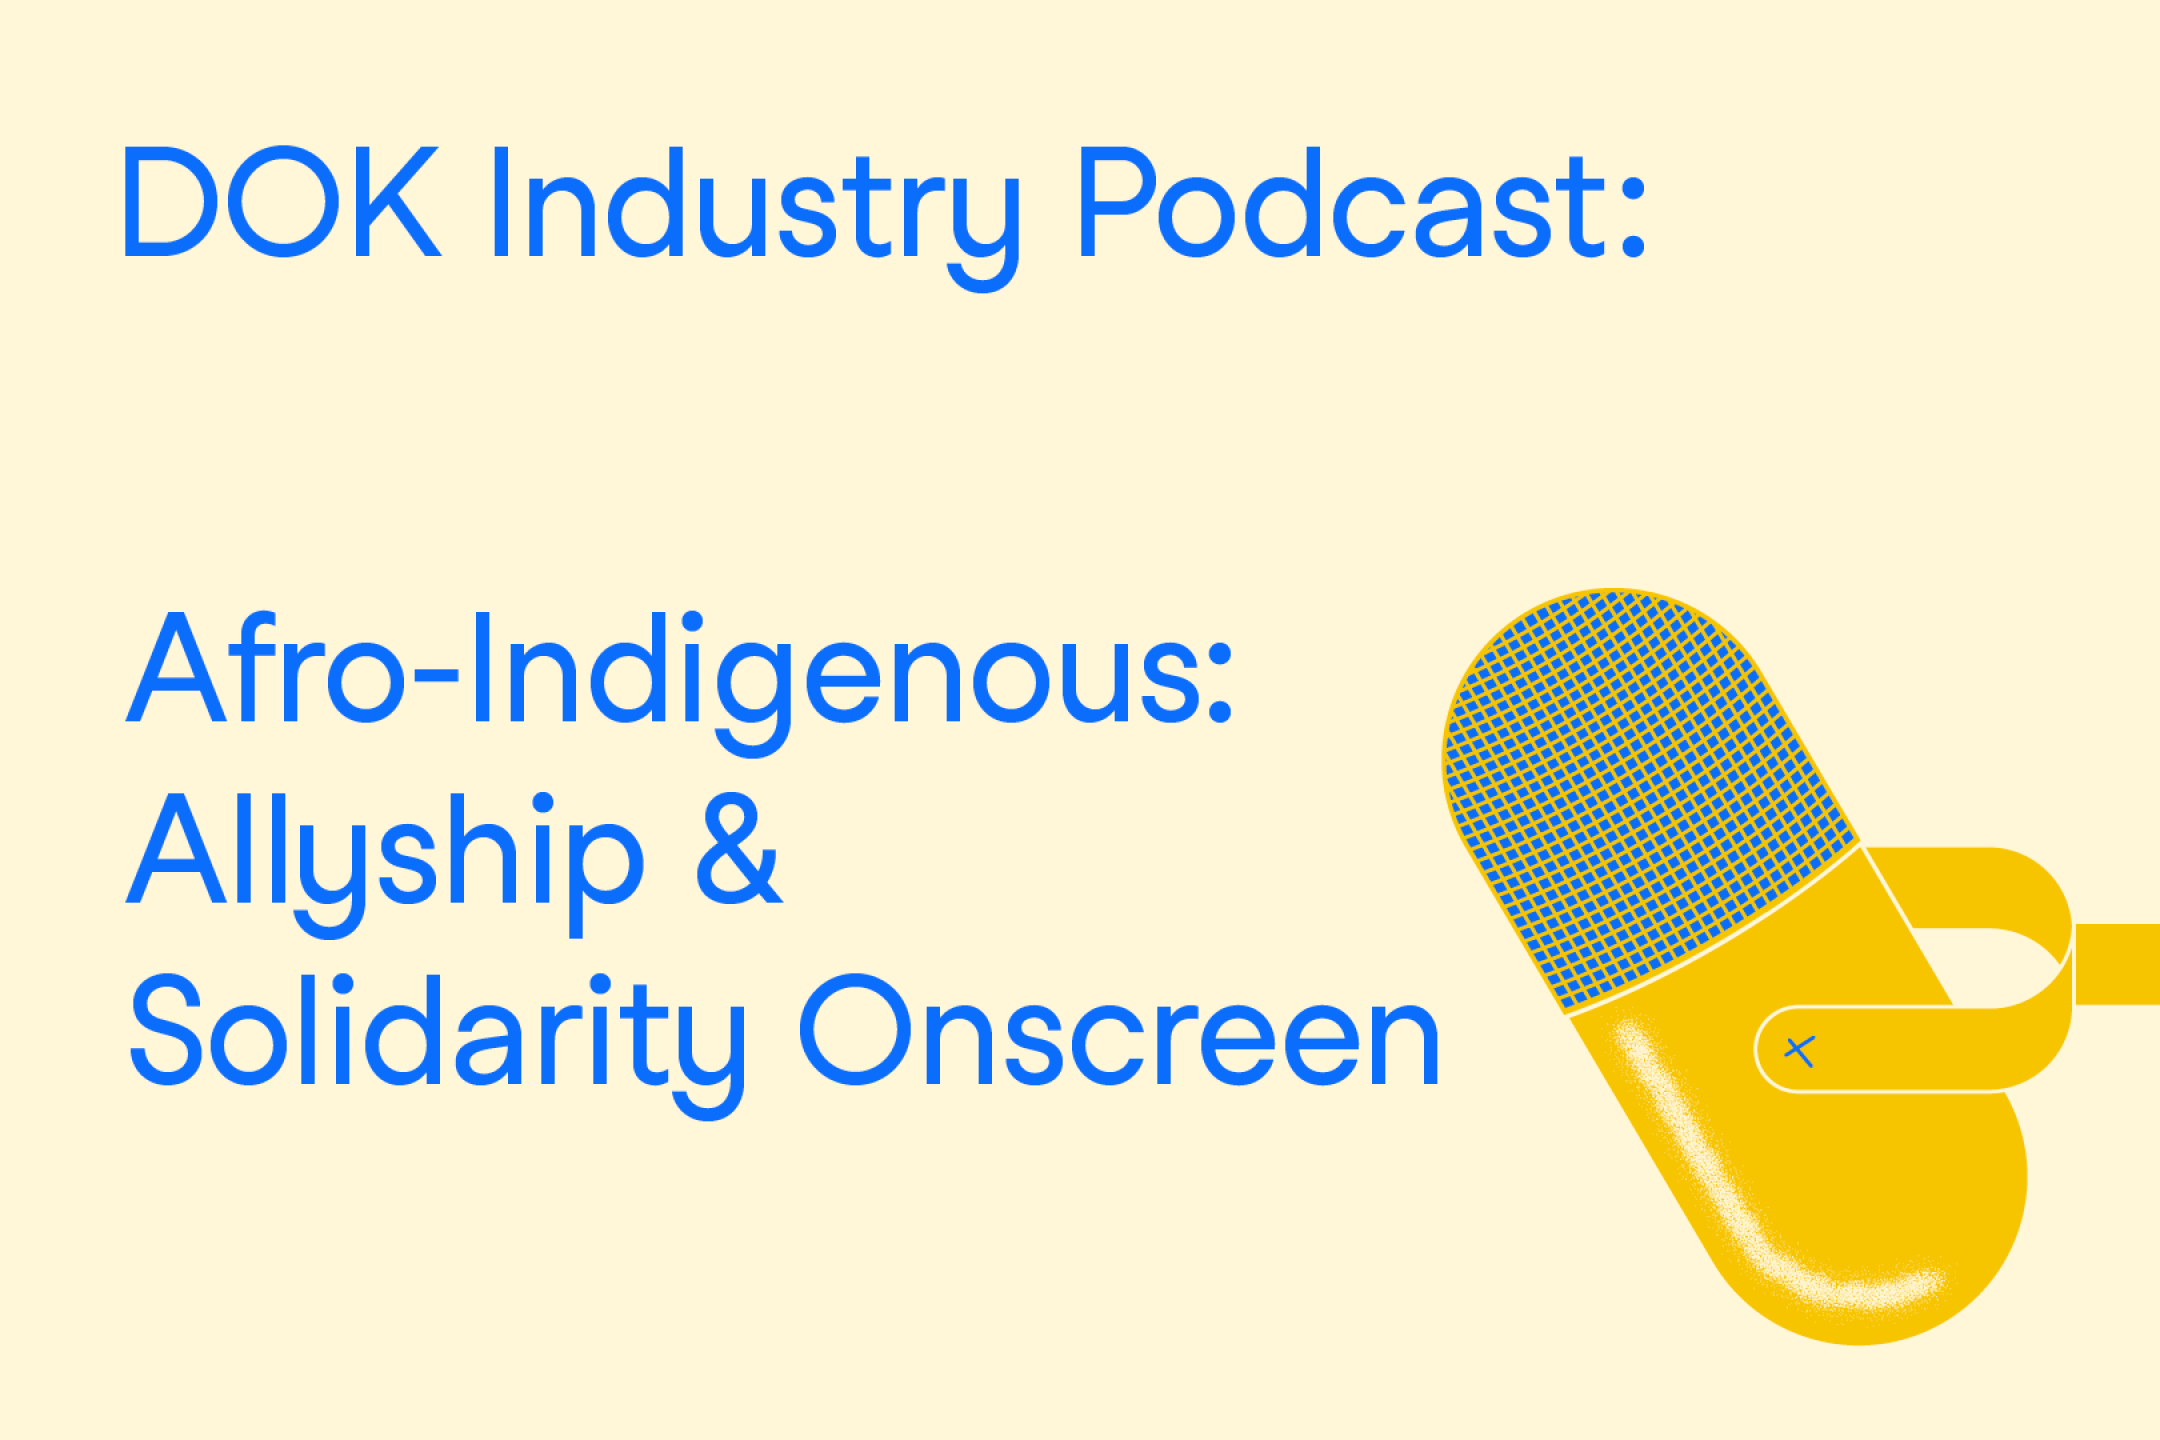 A text graphic with blue letters on a yellow background. At the right the illustration of a microphone. At the left the text: "DOK Industry Podcast: Afro-Indigenous: Allyship & Solidarity Onscreen”